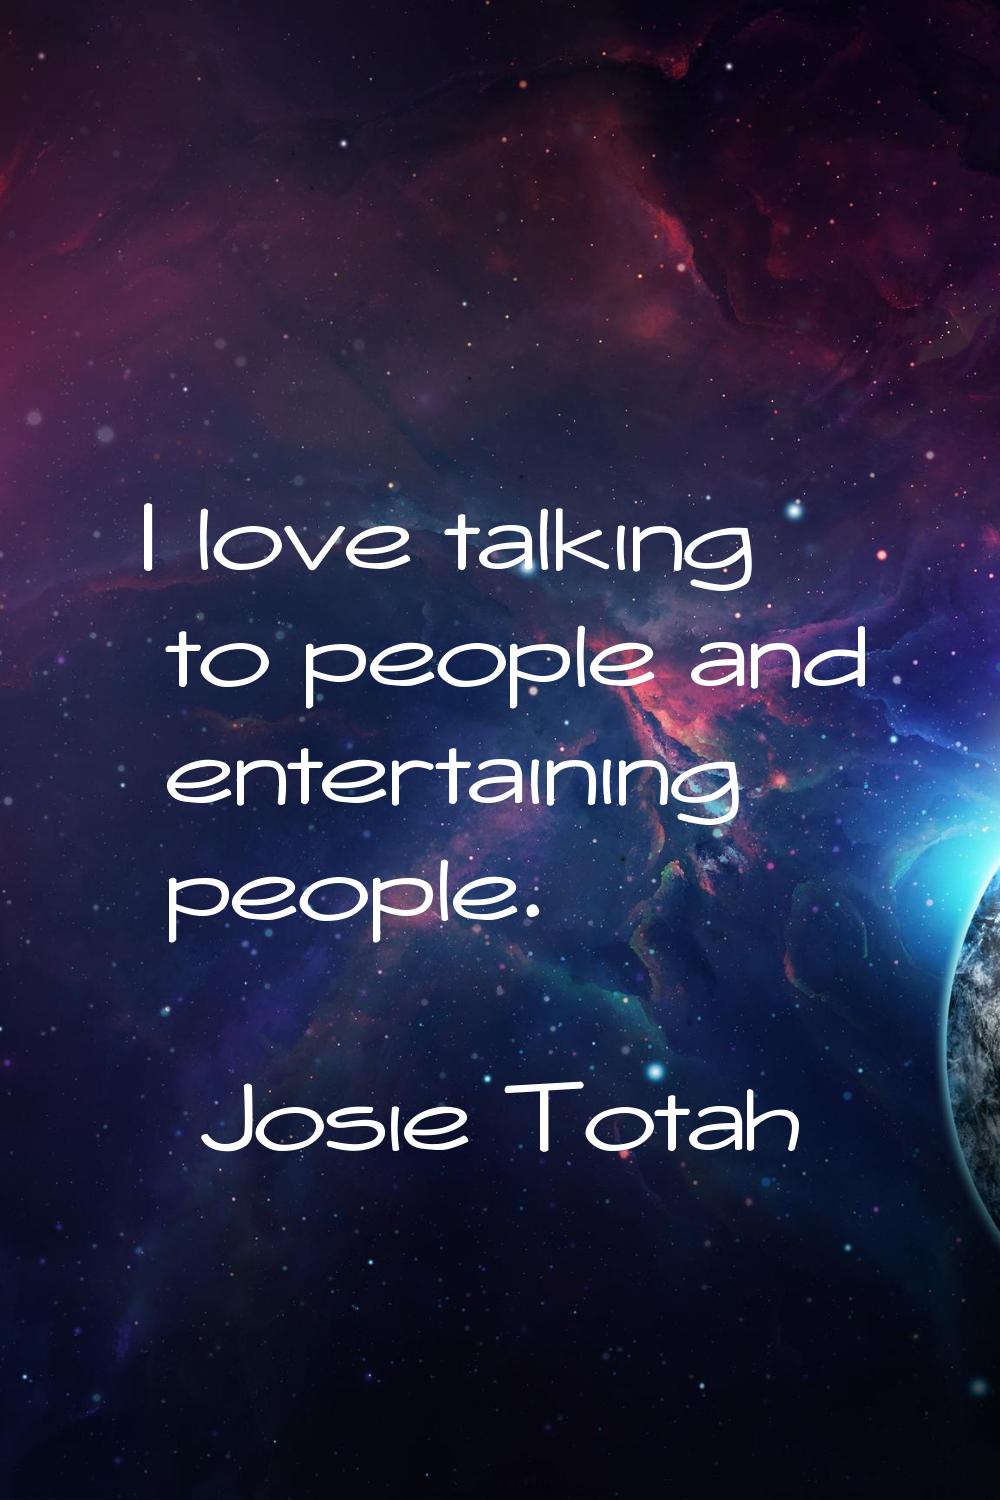 I love talking to people and entertaining people.